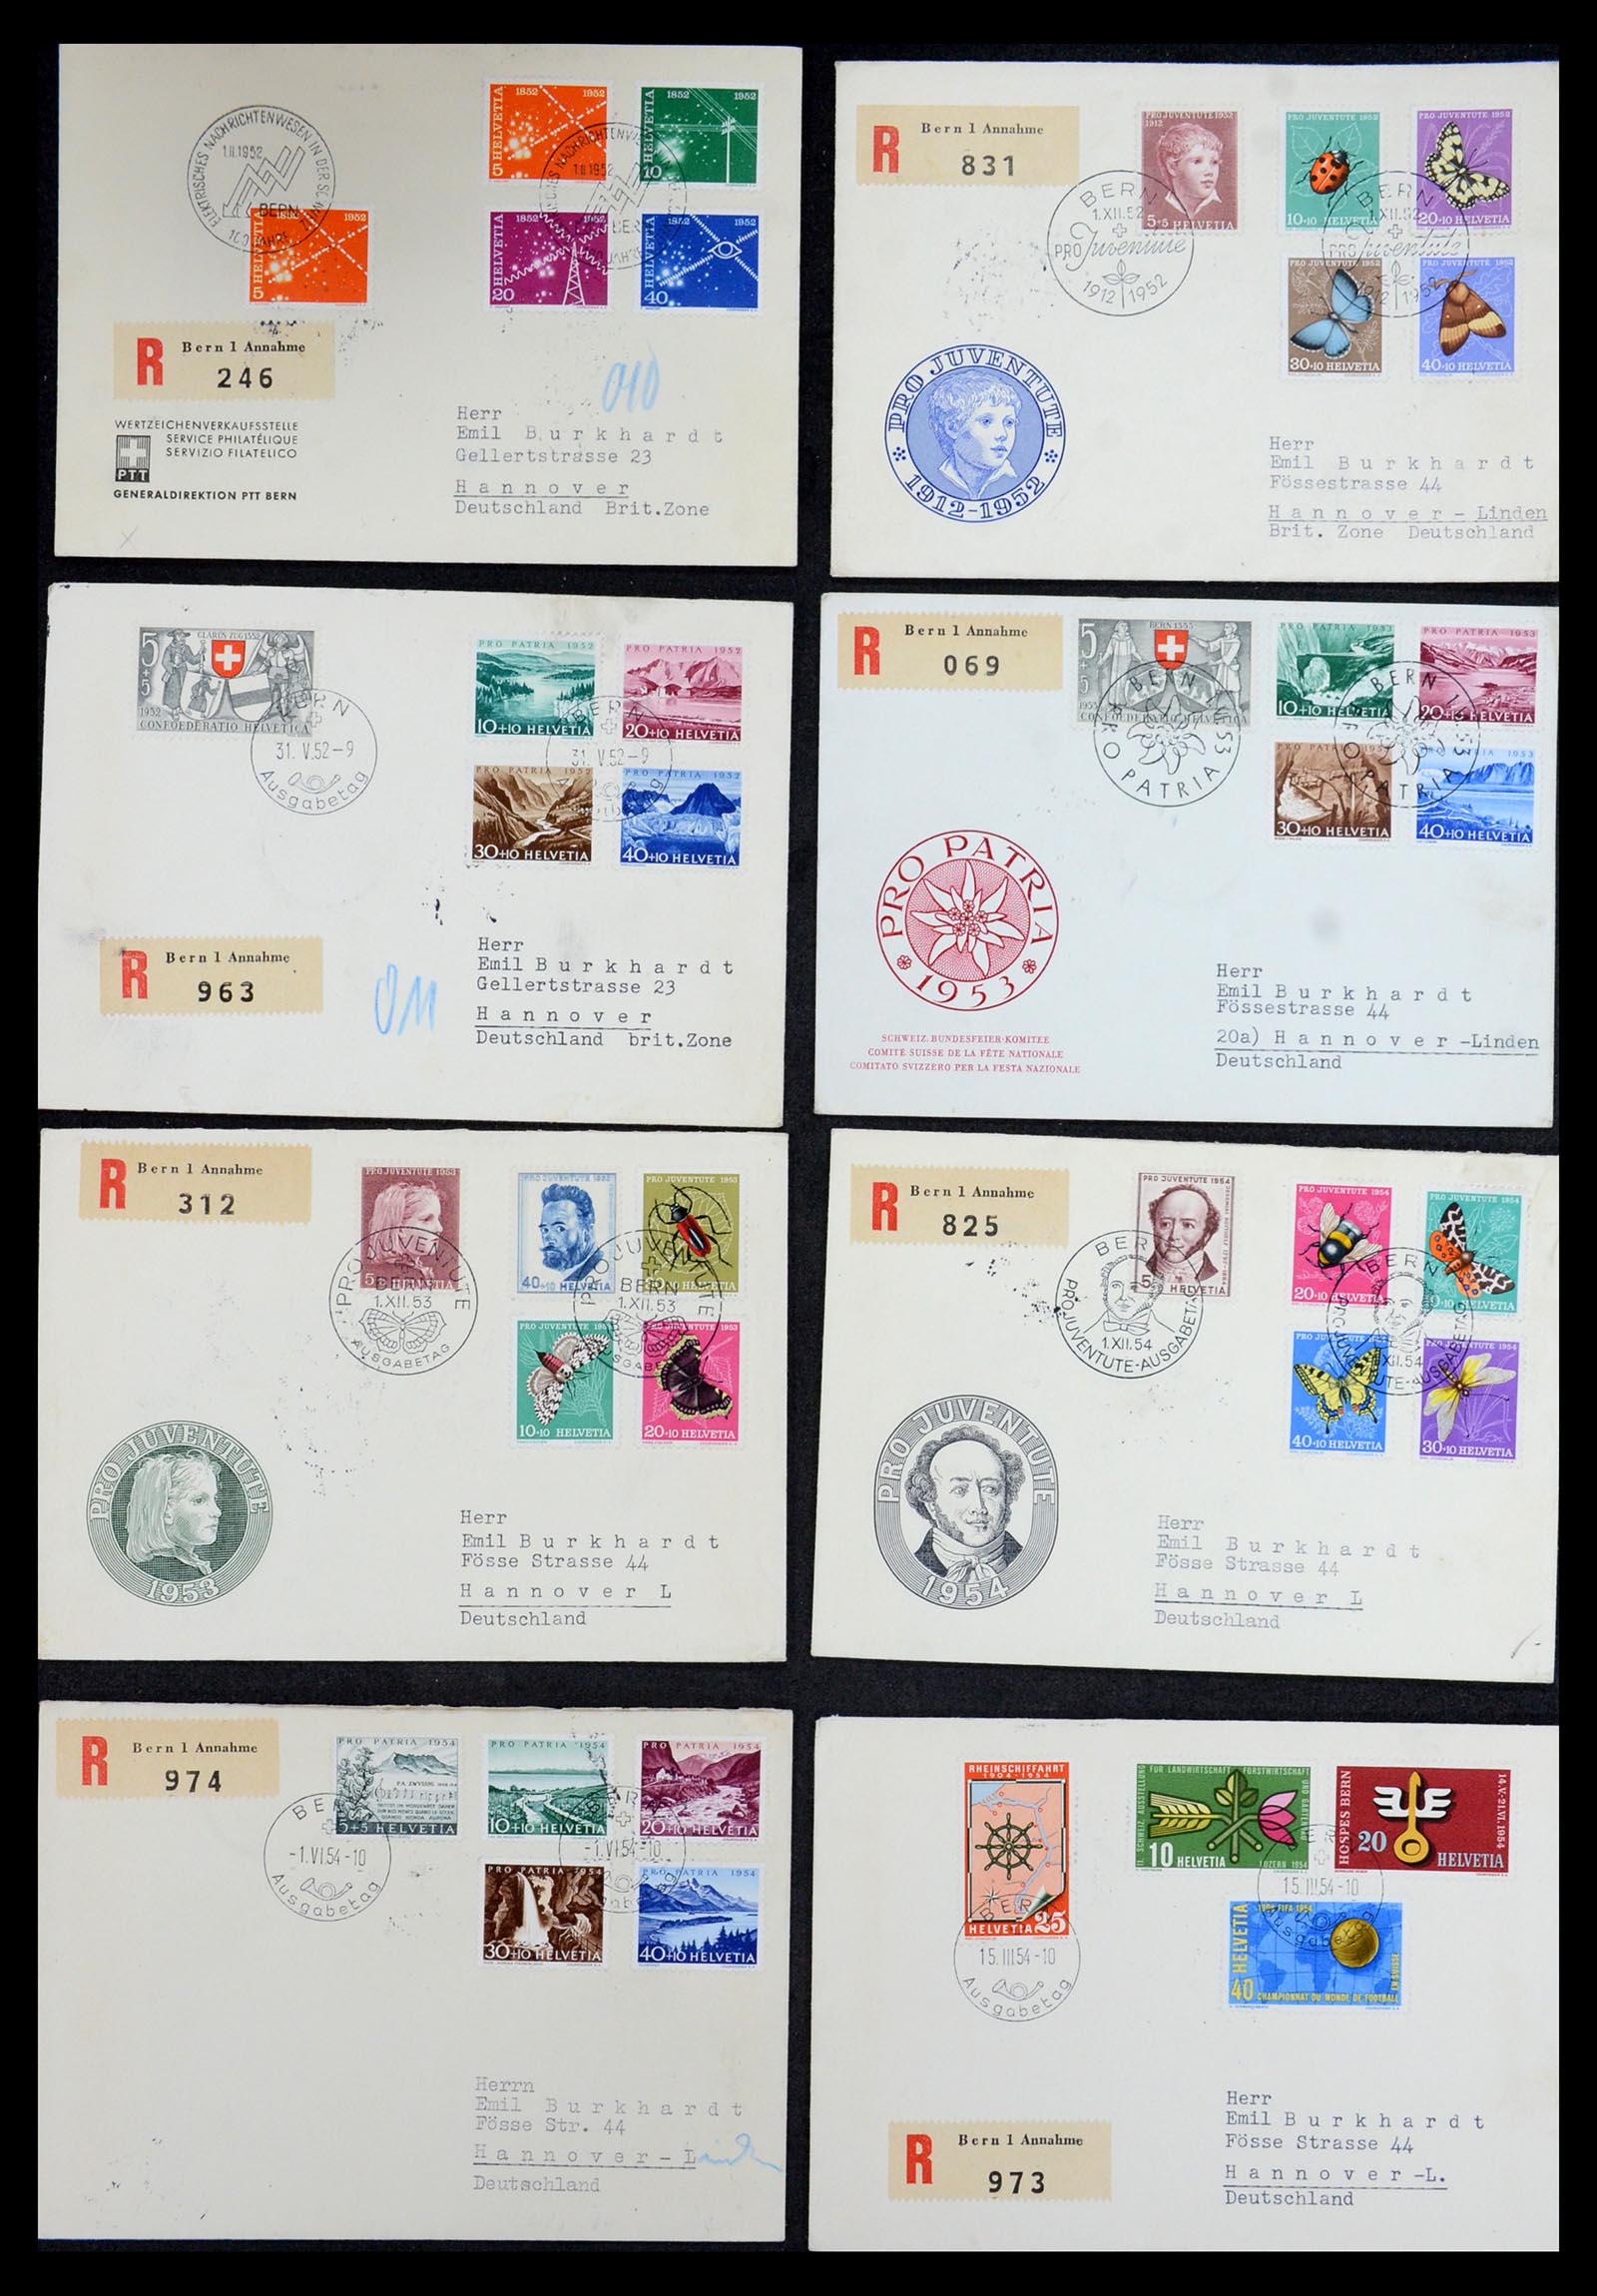 36262 001 - Stamp collection 36262 Switzerland FDC's 1952-1959.